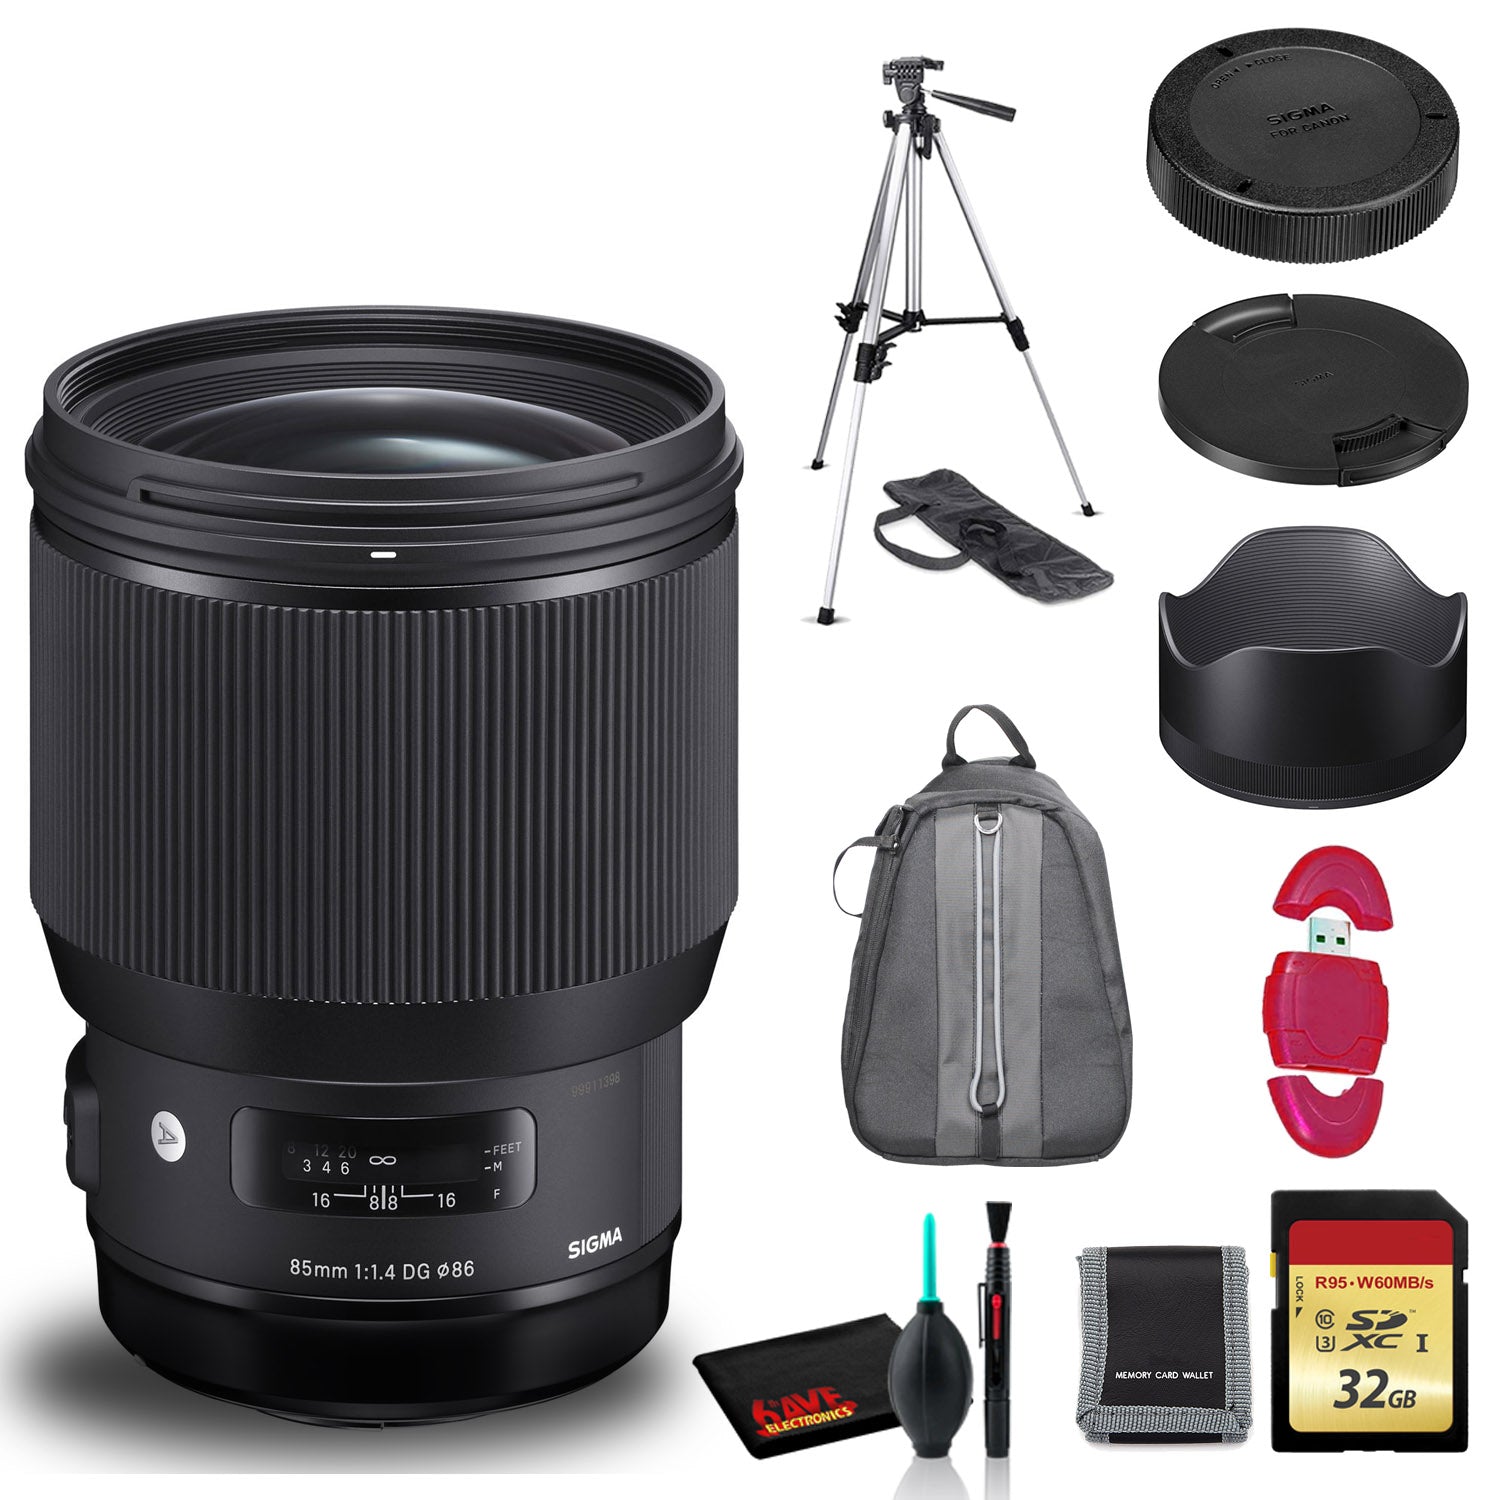 Sigma 85mm f/1.4 DG HSM Art Lens for Canon EF with Cleaning Kit, Tripod, 32GB Memory Kit, and Padded Backpack